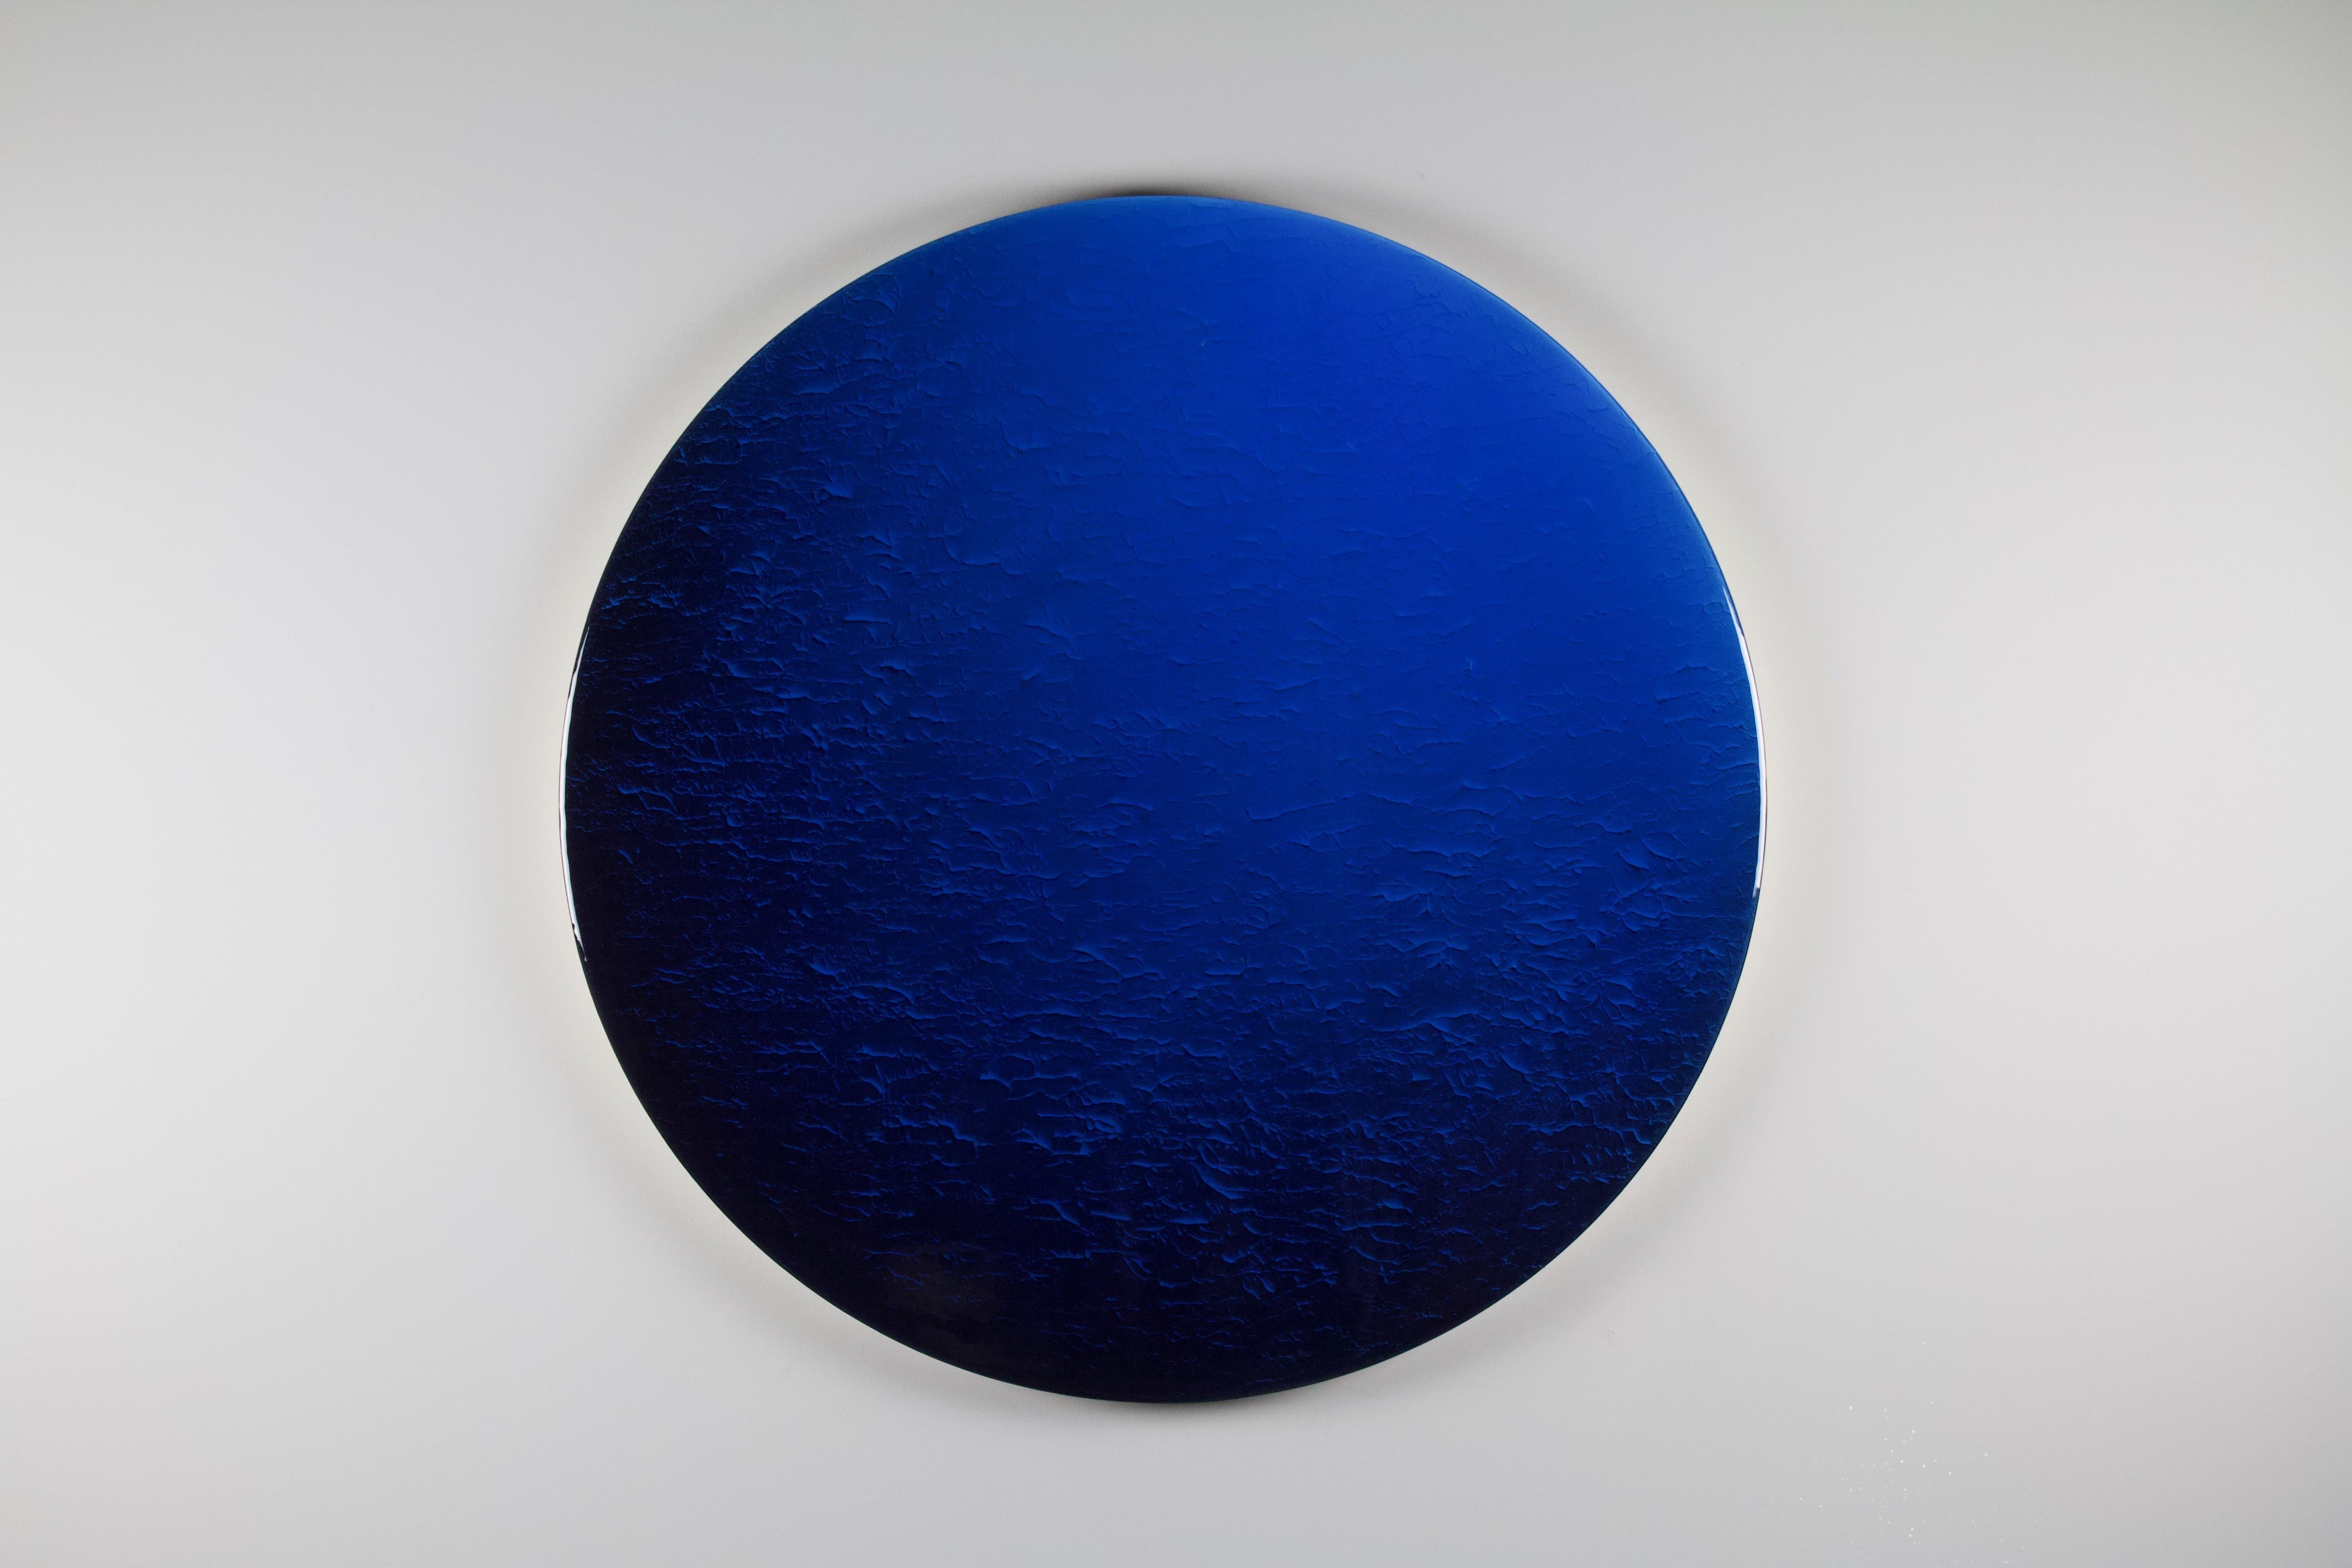 Two kinds of people minimalistic round by Corine Vanvoorbergen
Dimensions: diameter 180 cm
Materials: Brass, wood, natural pigments, epoxy and acrylics

There are two kinds of people. Those that see the night coming and those that see the day